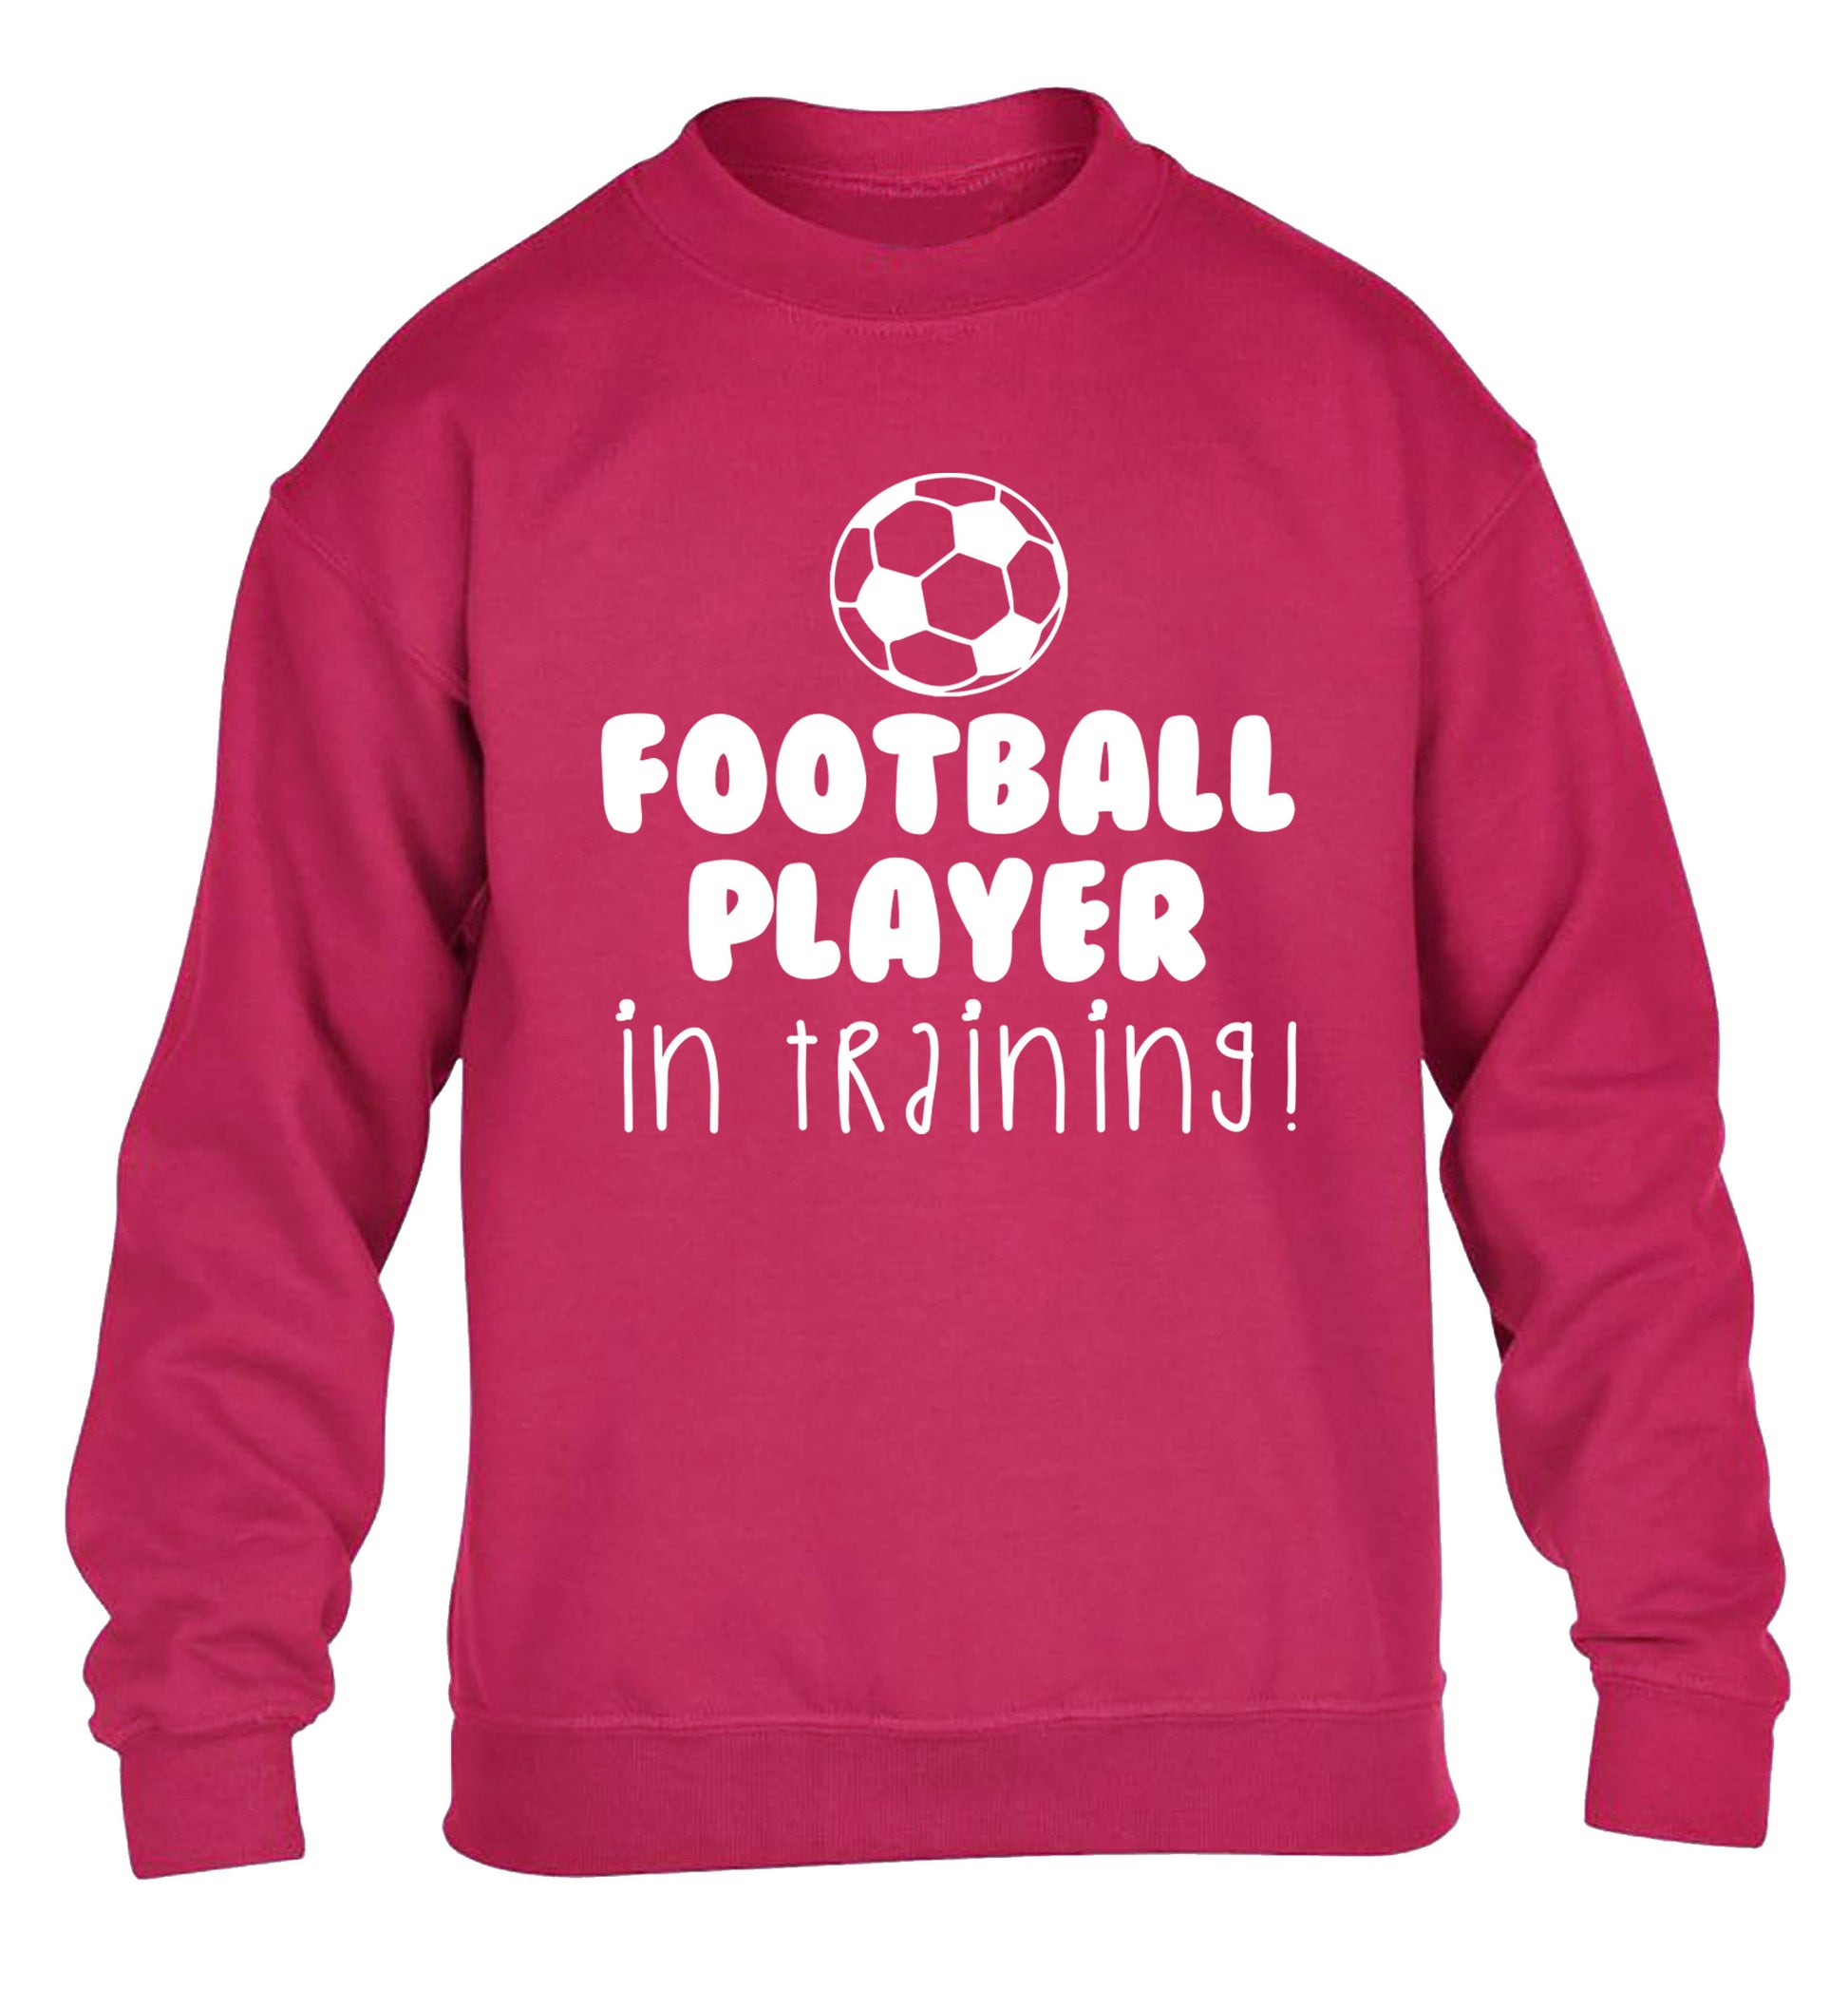 Football player in training children's pink sweater 12-14 Years